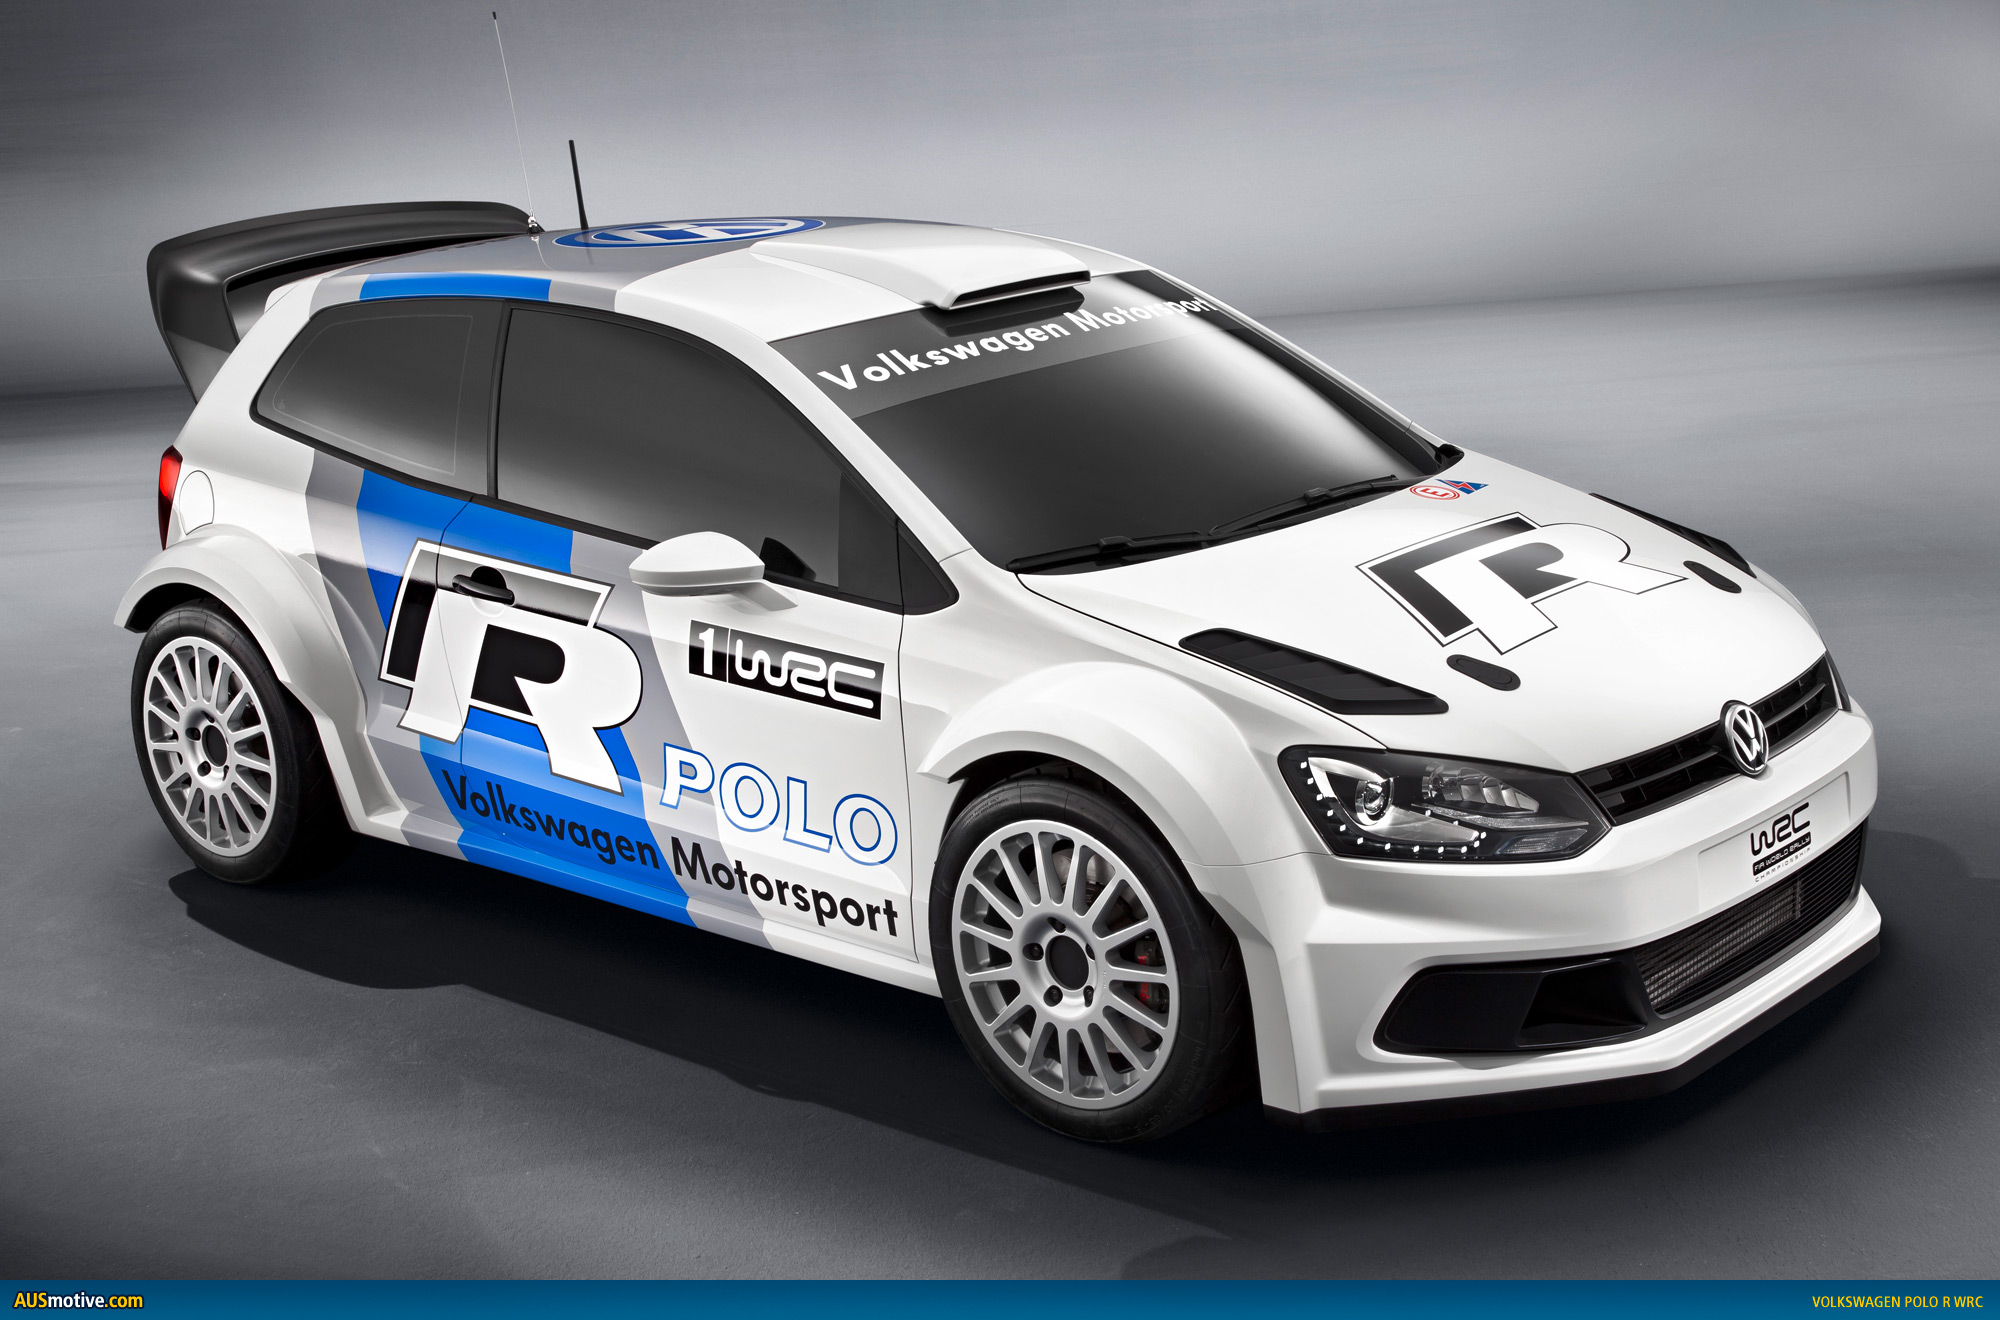 HQ 2013 Volkswagen Polo Wrc Wallpapers | File 496.9Kb